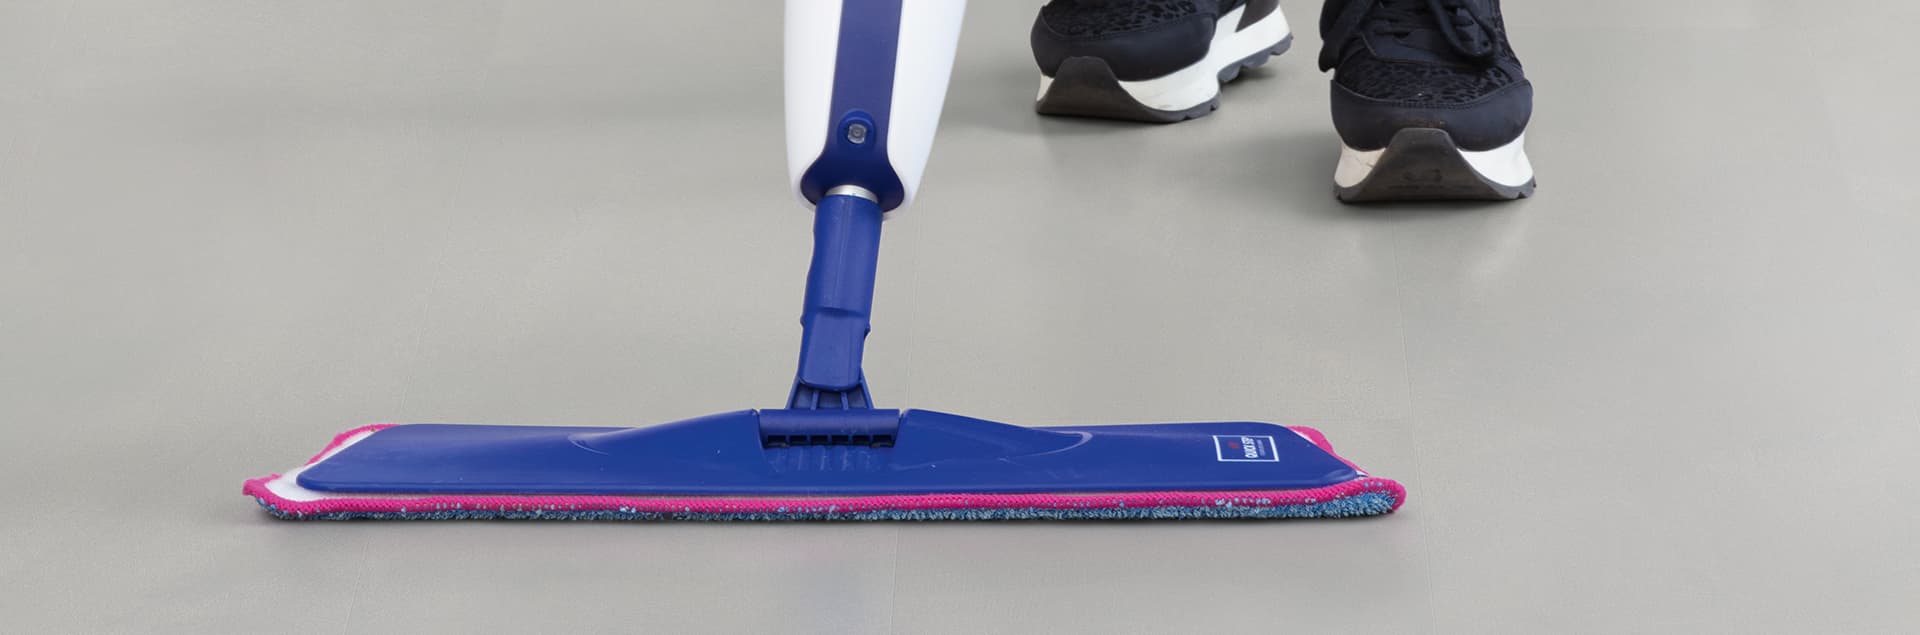 Quick-Step vinyl cleaning and maintenance tools